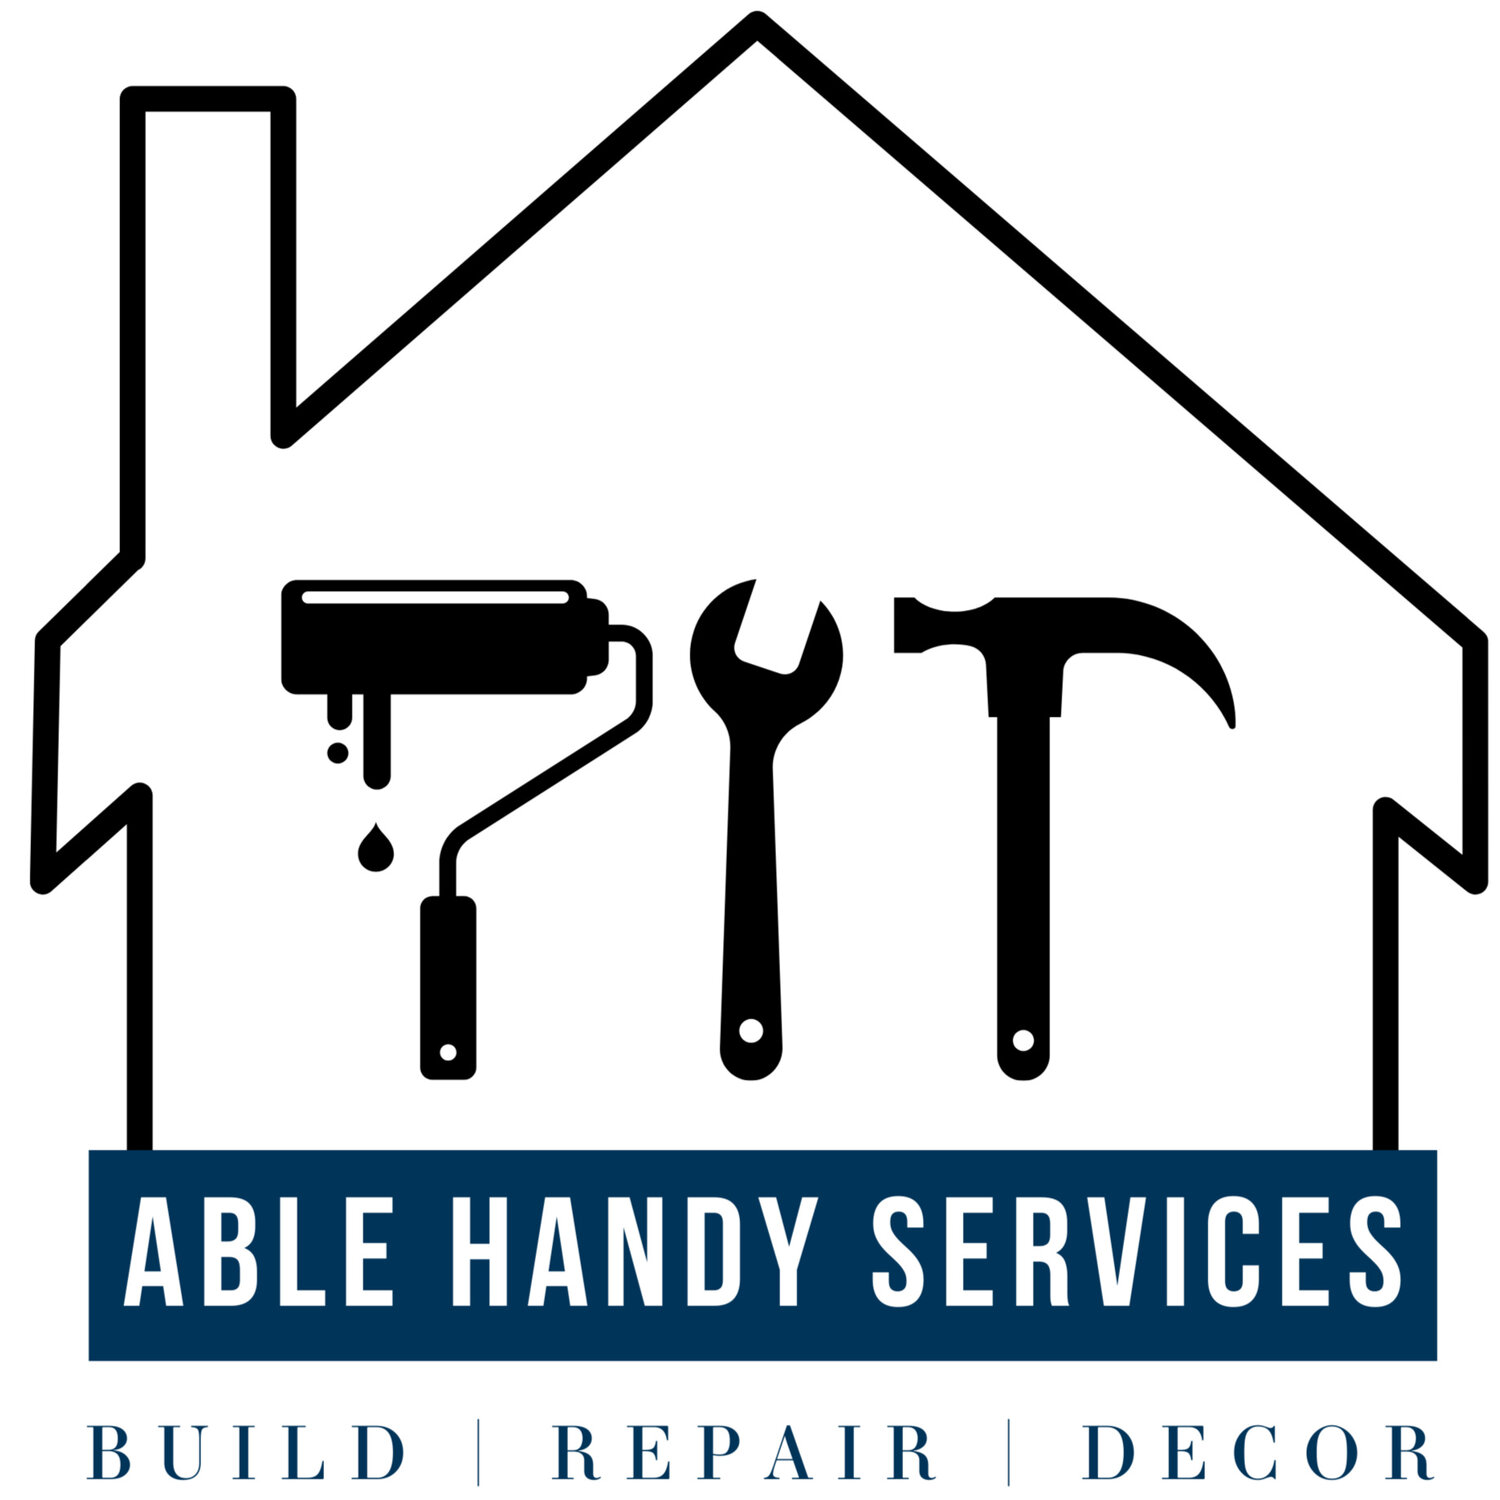 Able Handy Services